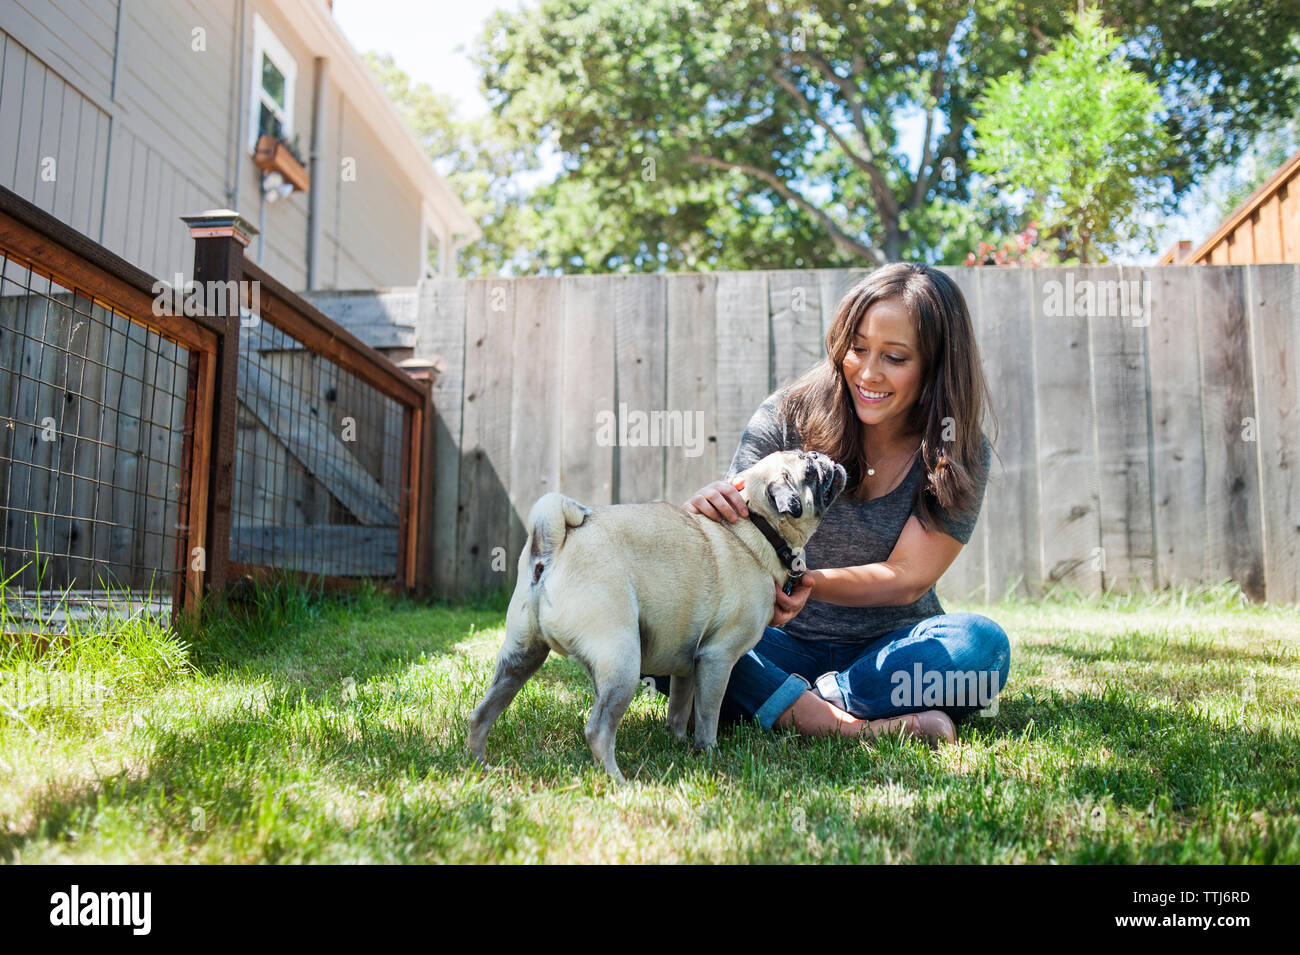 Woman playing with pug while sitting on grassy field in backyard Stock Photo